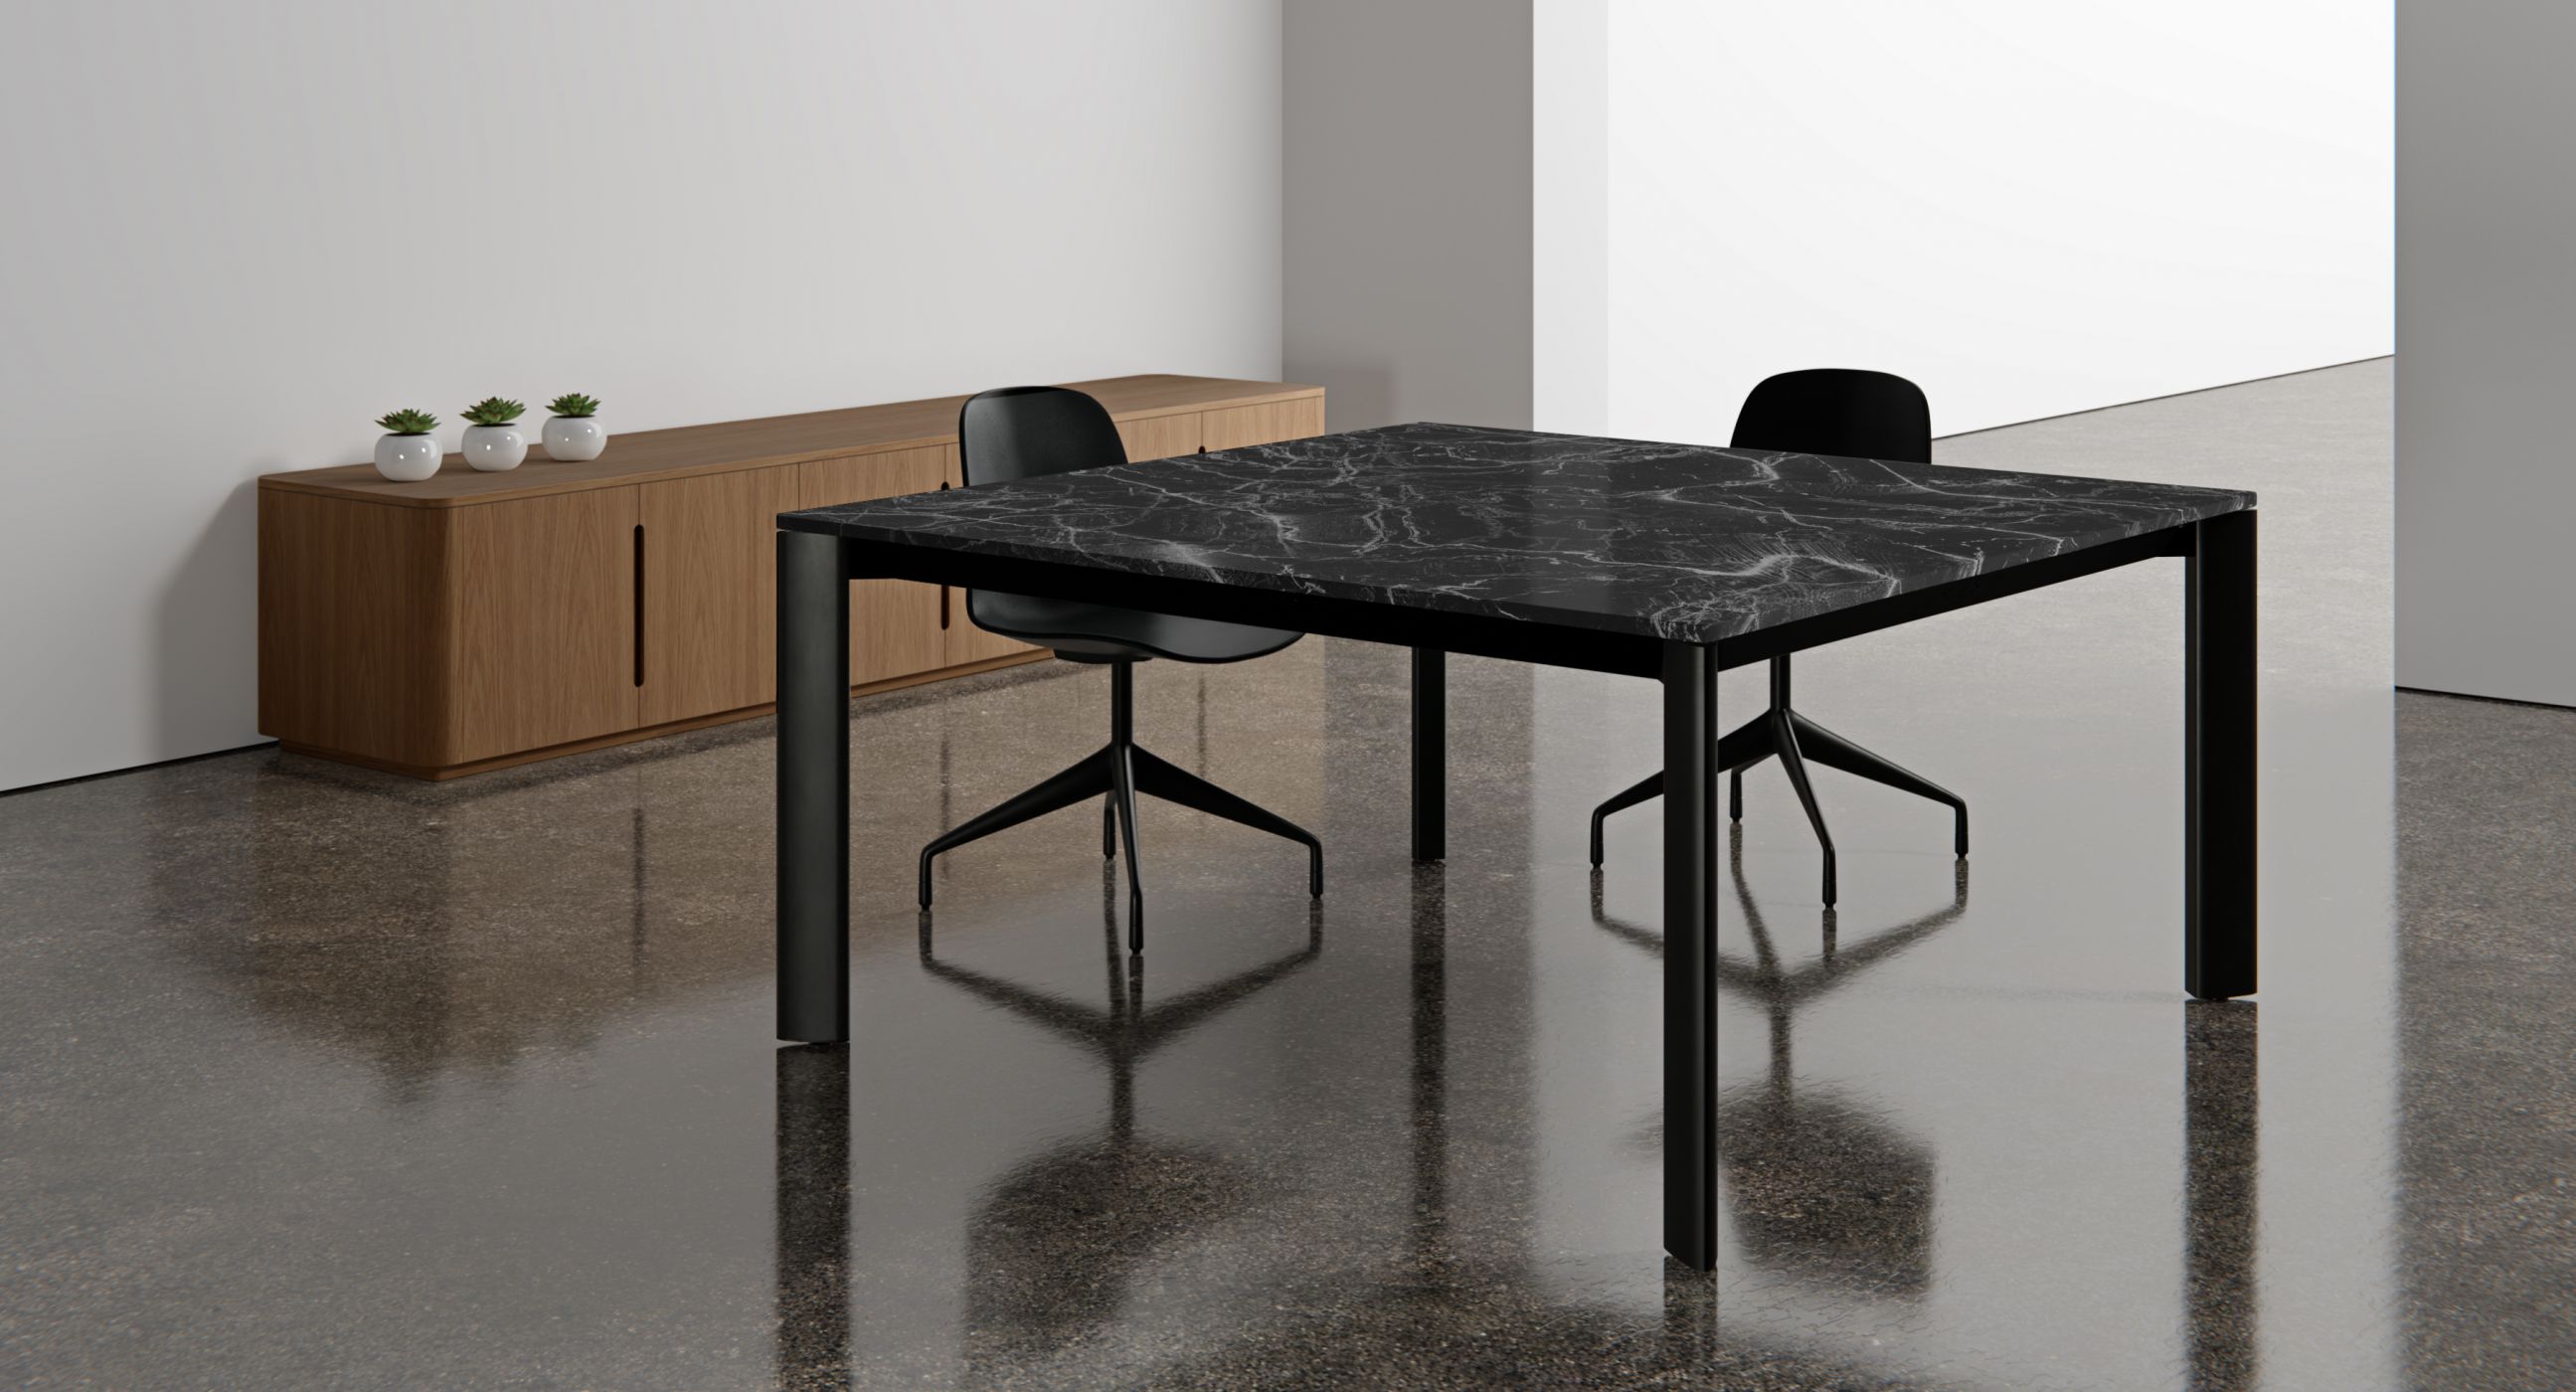 Crew mobile and fixed conference tables are available in a full range of sizes and finishes.